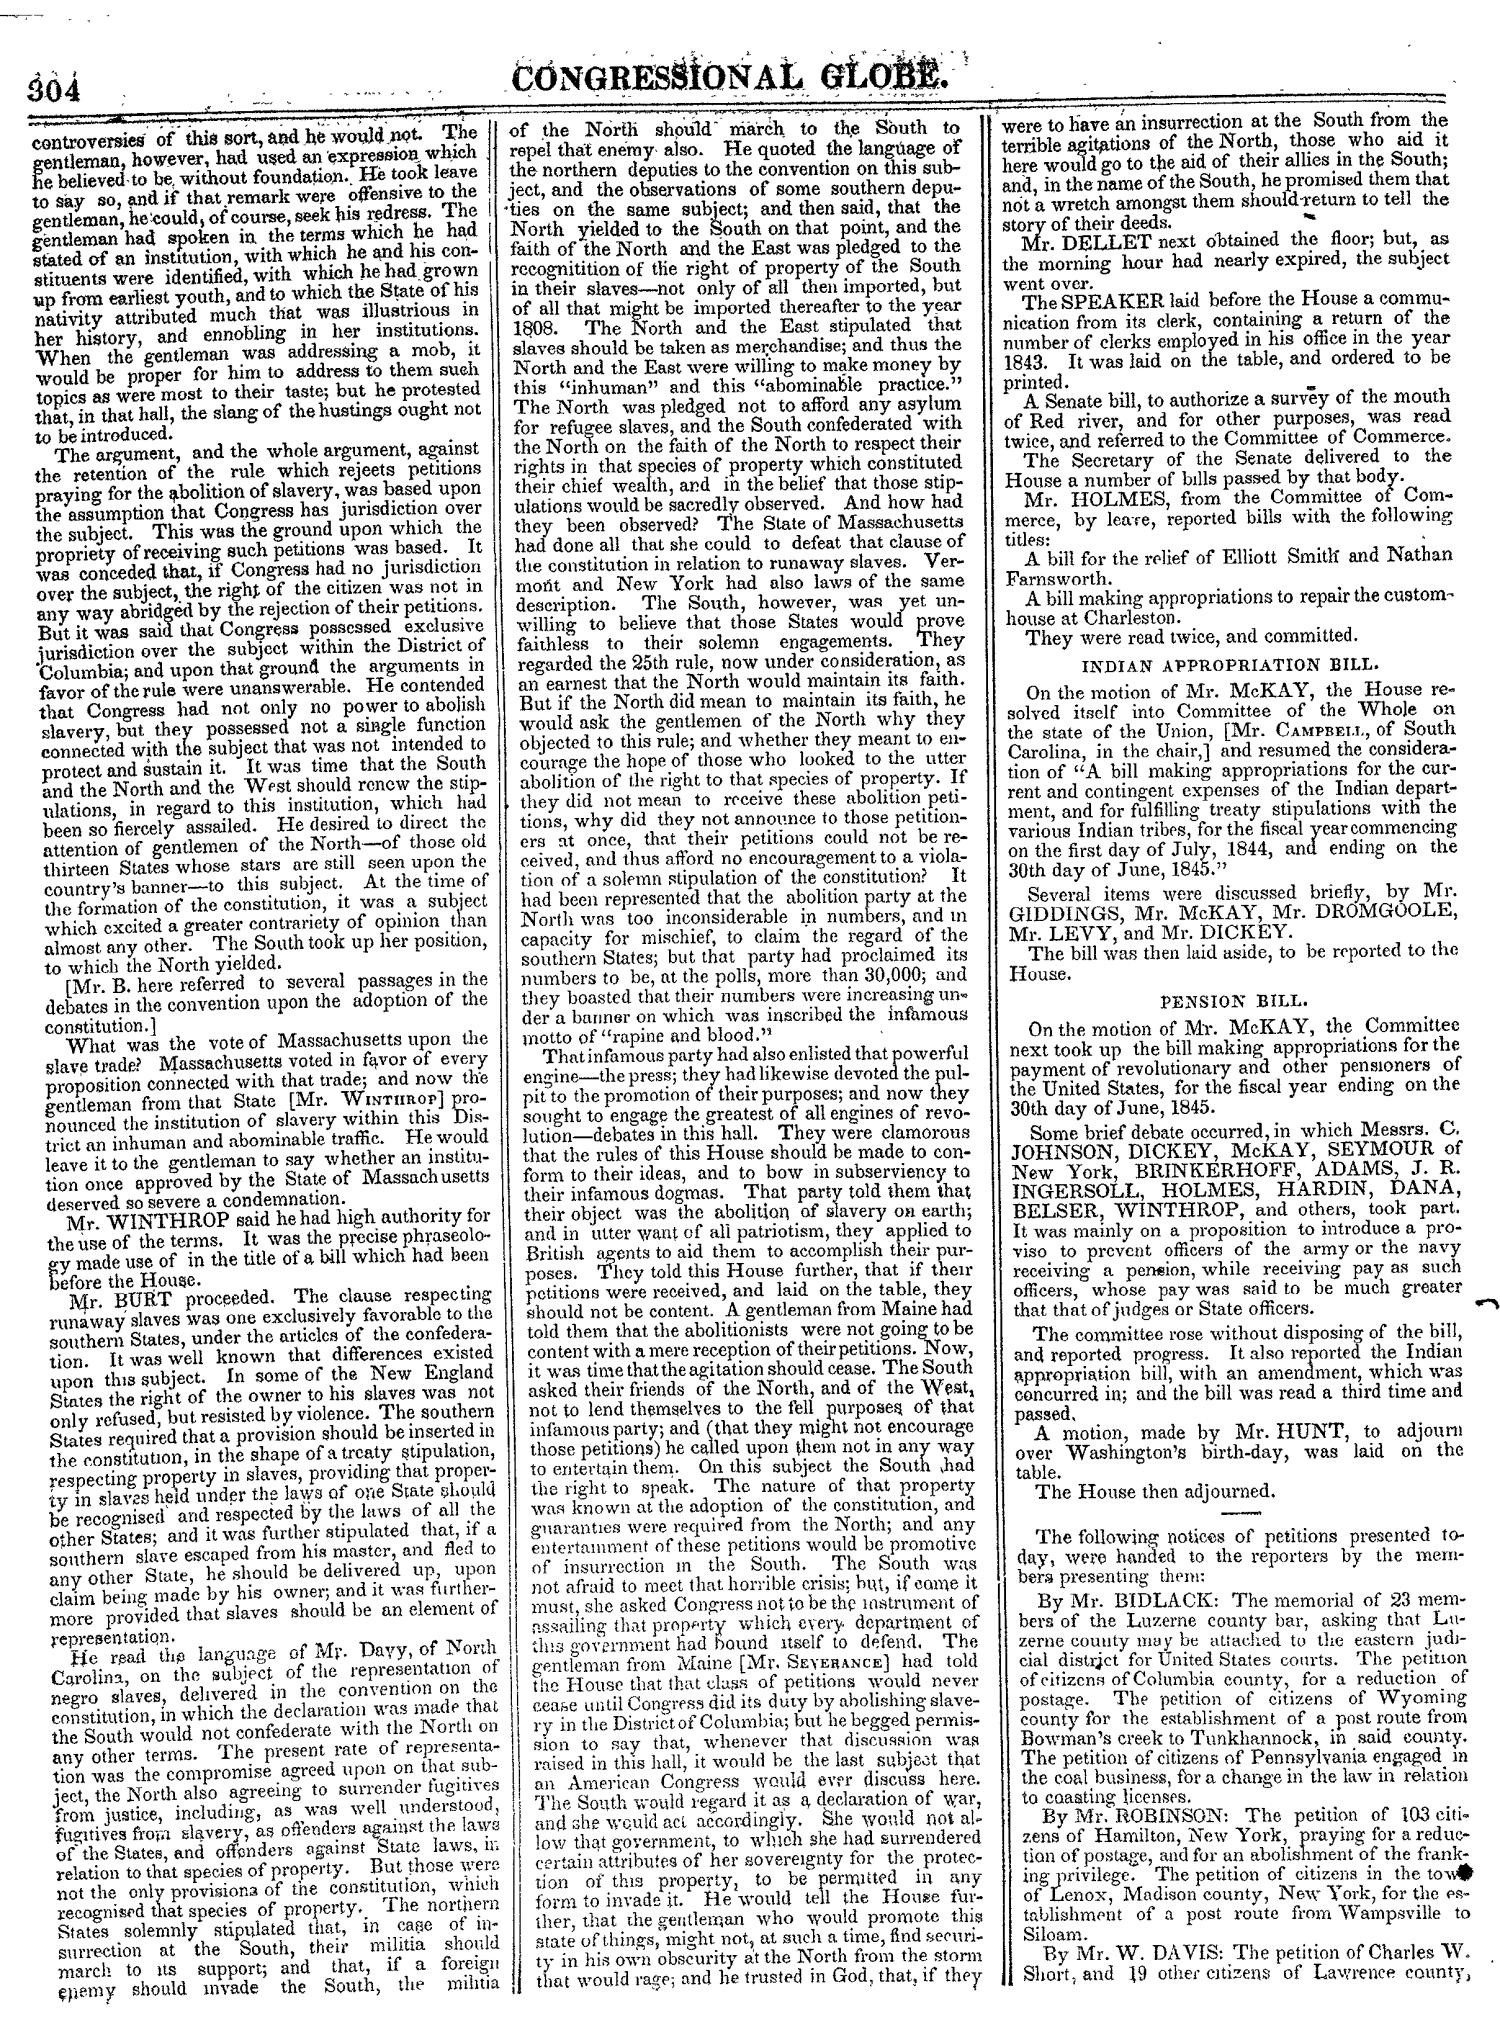 The Congressional Globe, Volume 13, Part 1: Twenty-Eighth Congress, First Session
                                                
                                                    304
                                                